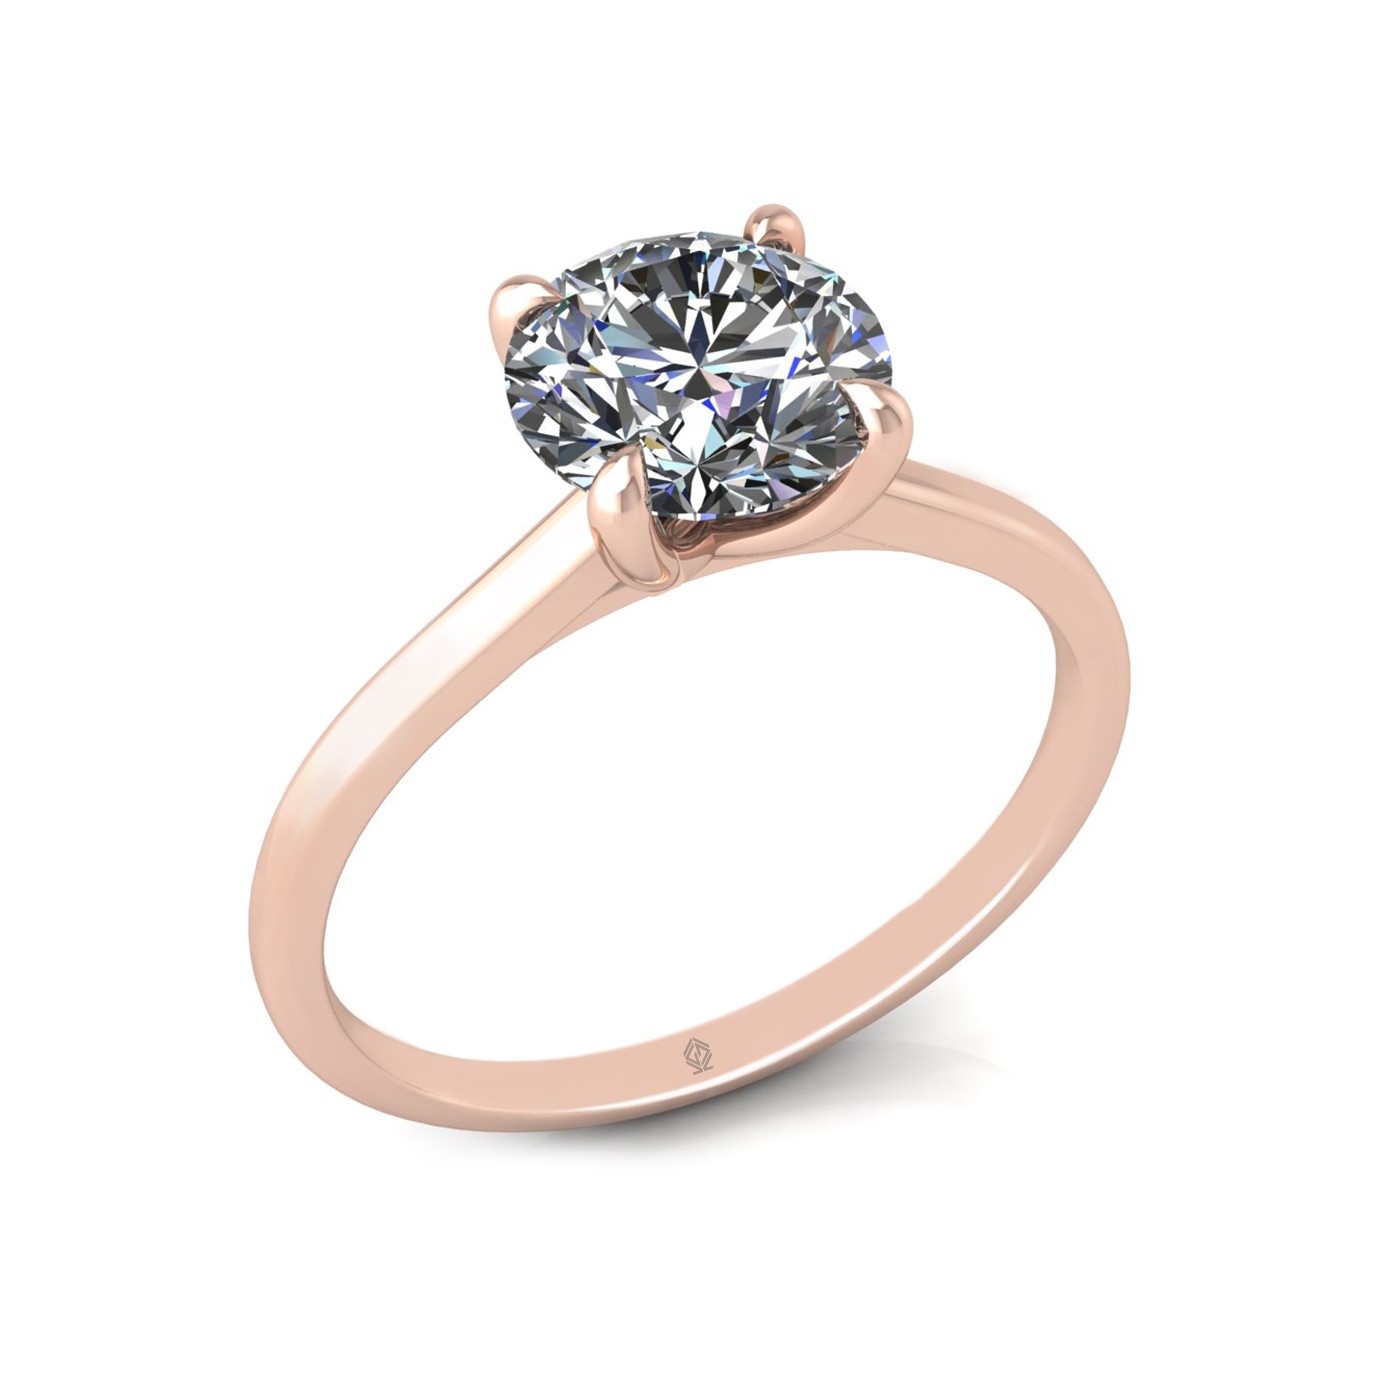 18k rose gold 1.5ct 4 prongs solitaire round cut diamond engagement ring with whisper thin band